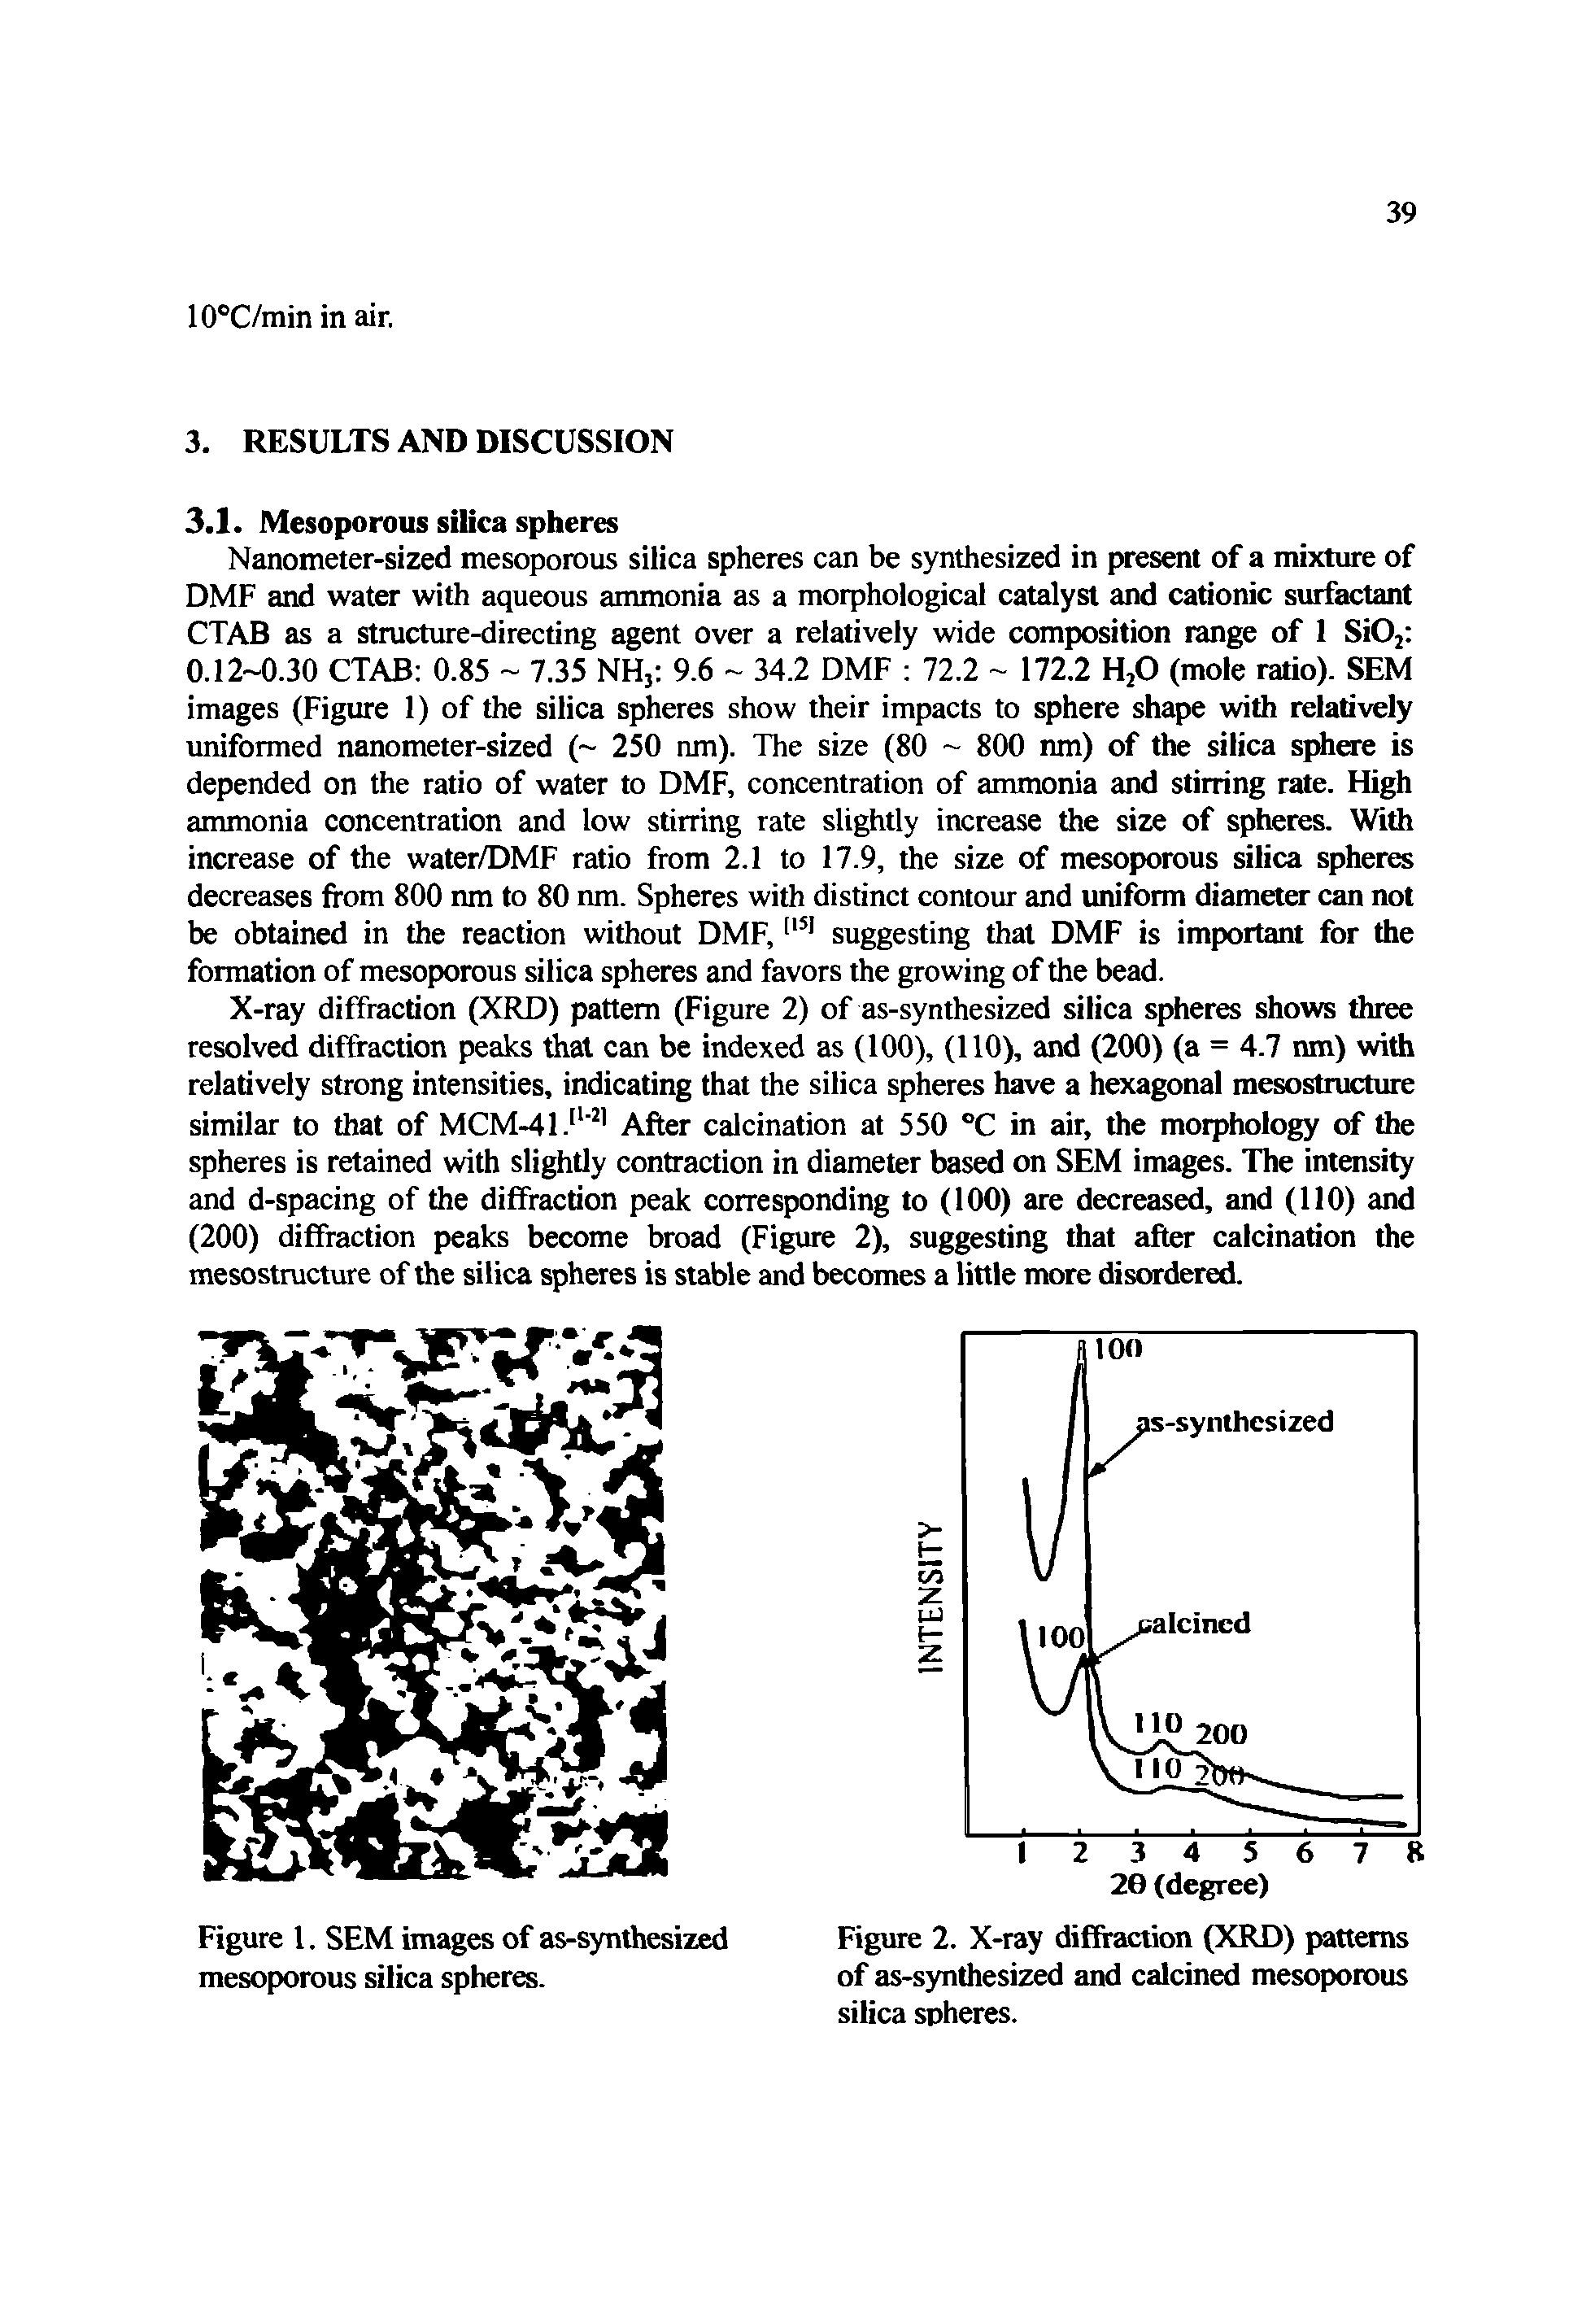 Figure 2. X-ray diffraction (XRD) patterns of as-synthesized and calcined mesoporous silica spheres.